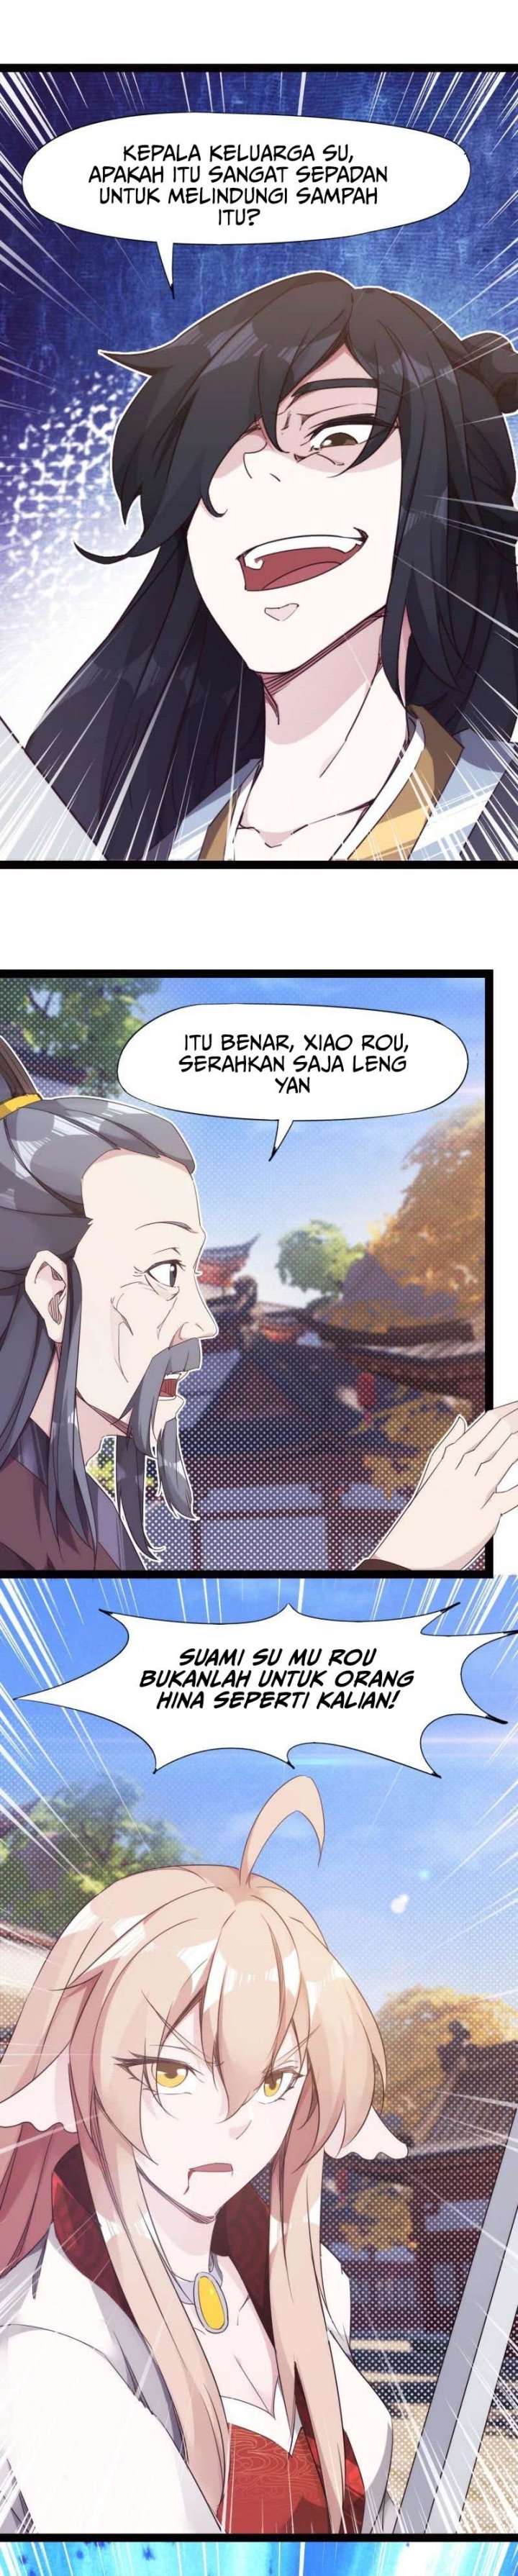 Path Of The Sword Chapter 13